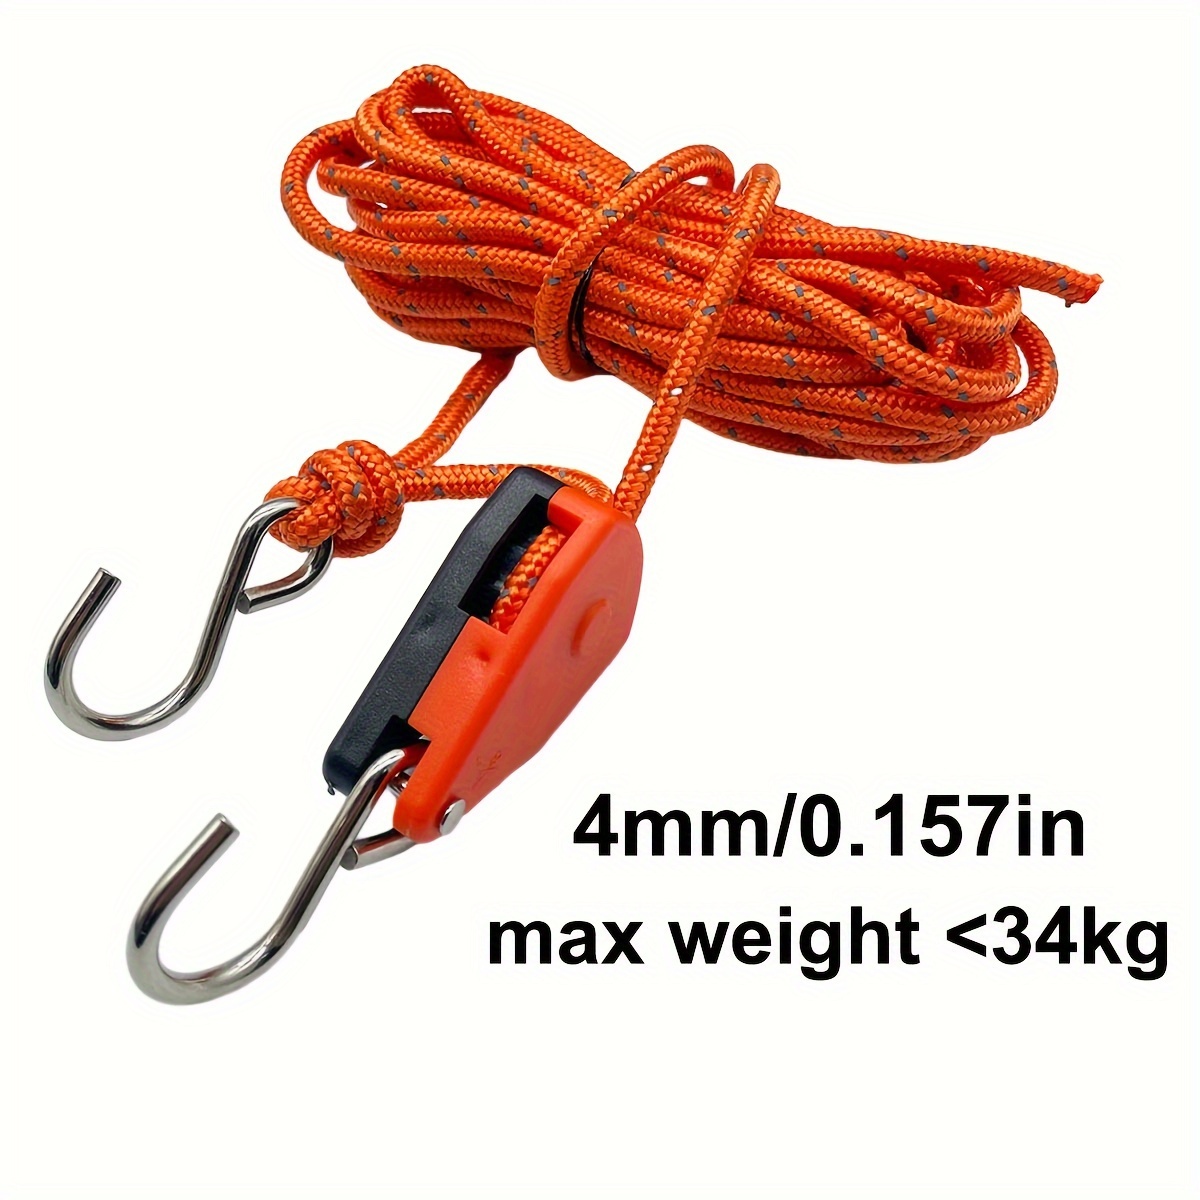 Tent Guideline Cord - Camping Pulley Rope | Reusable Tent Tie Down Rope  Hanger, Tent Guide Rope with Adjuster, Camping Awning Tent, Hiking Kayaking